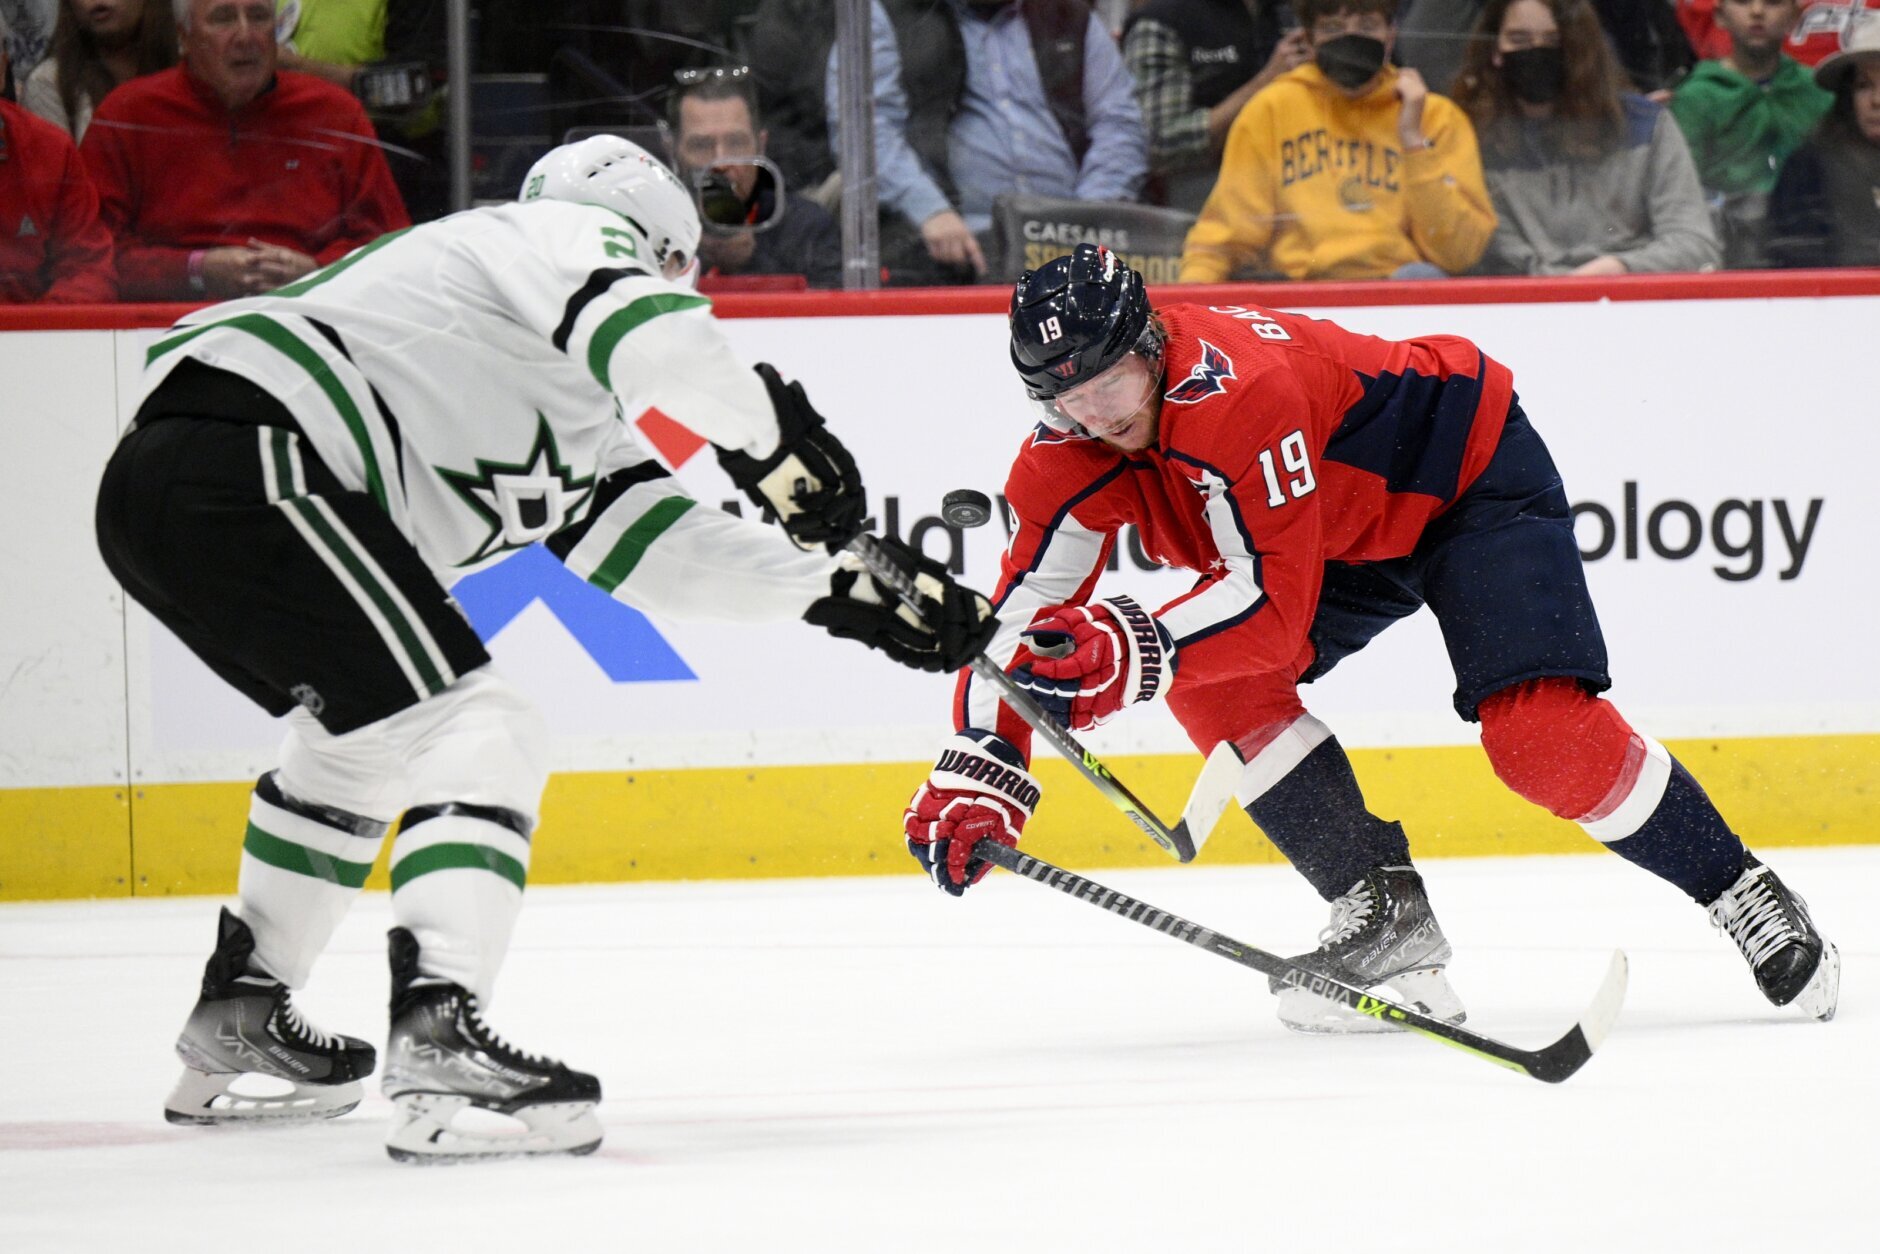 T.J. Oshie of the Washington Capitals flips the puck during